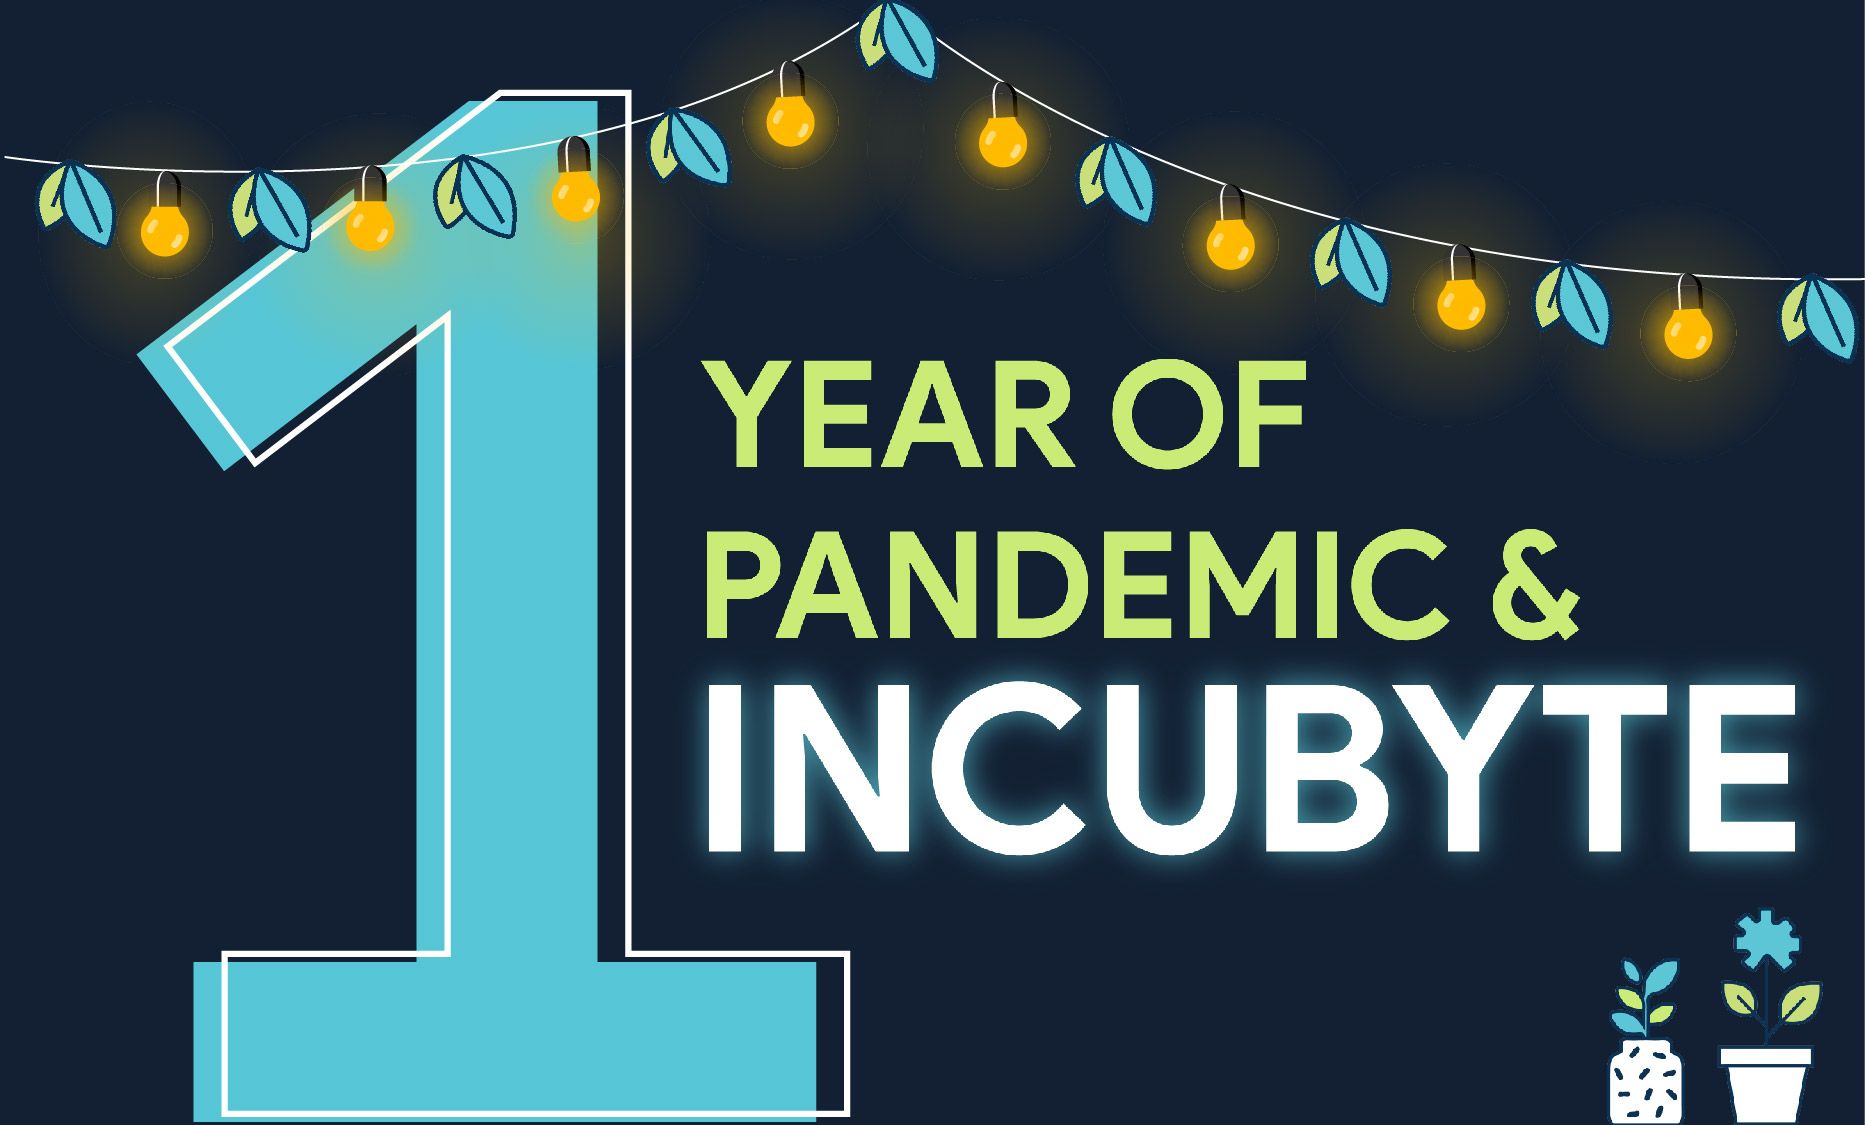 One Year Of Pandemic & One Year Of Incubyte